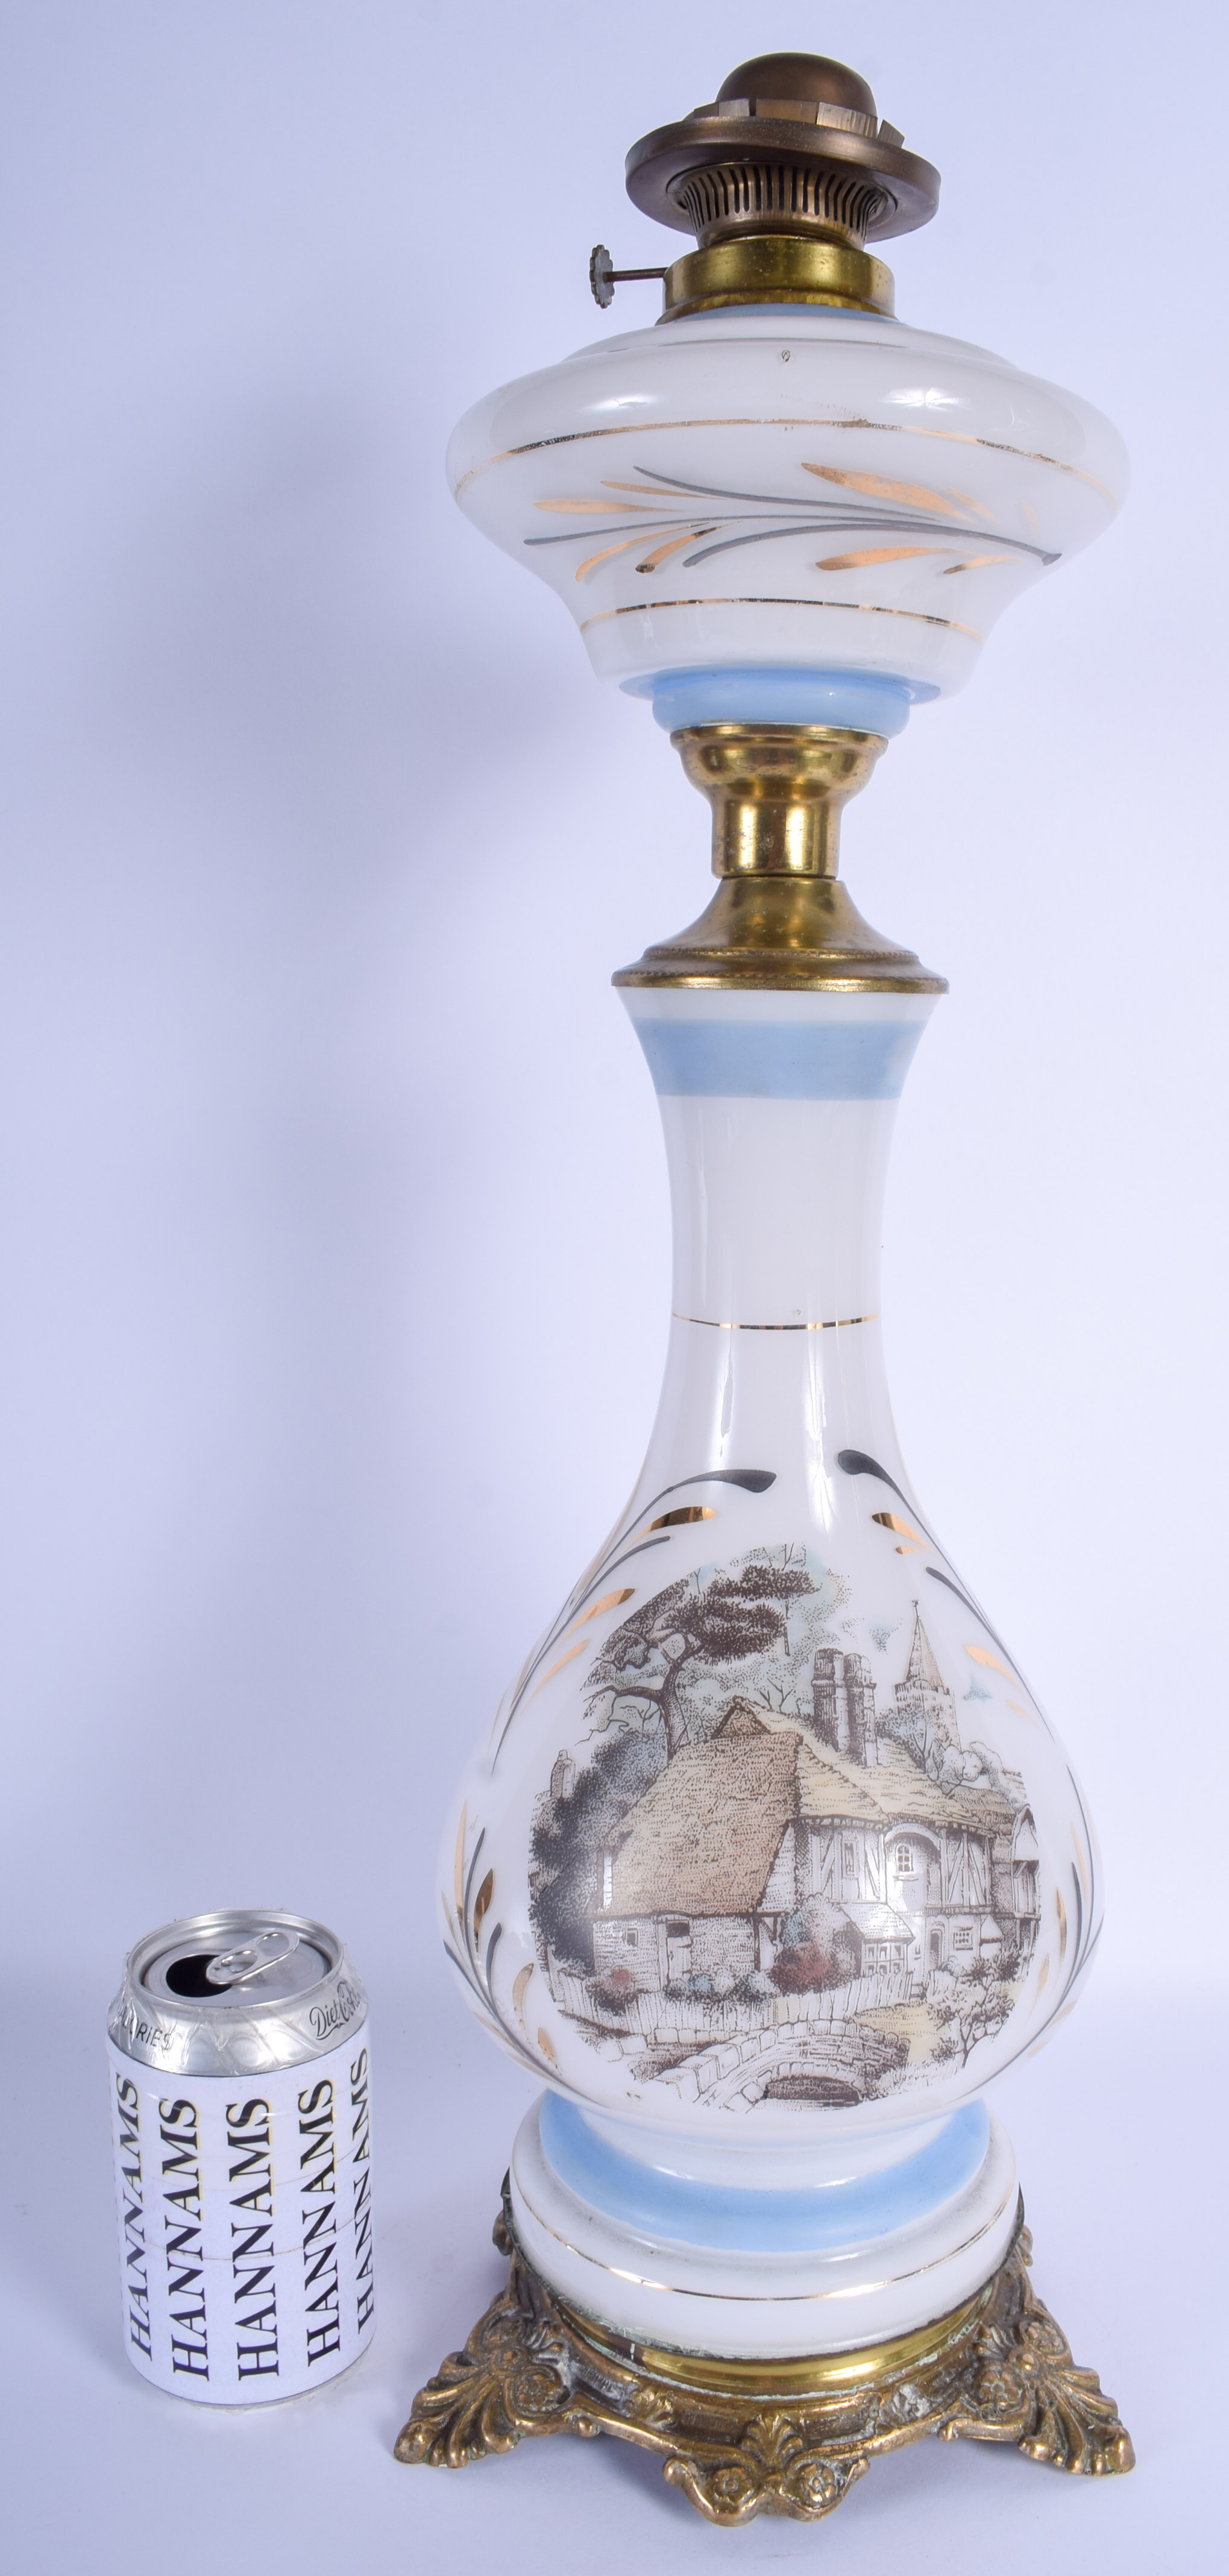 A VINTAGE OPALINE GLASS OIL LAMP decorated with buildings. 50 cm high.